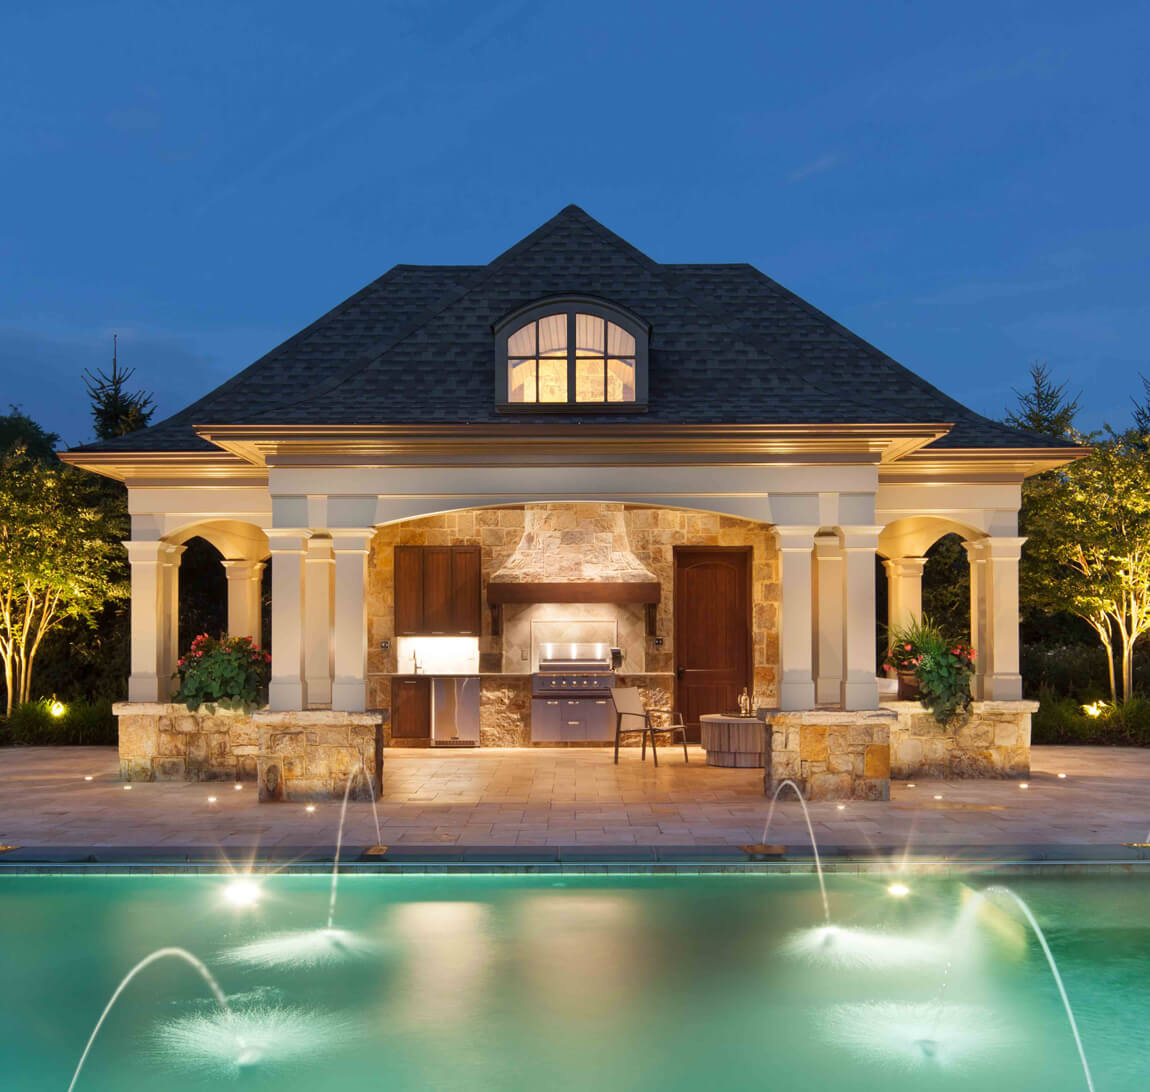 Outdoor Pool House Ideas / See photos & design ideas in your area.